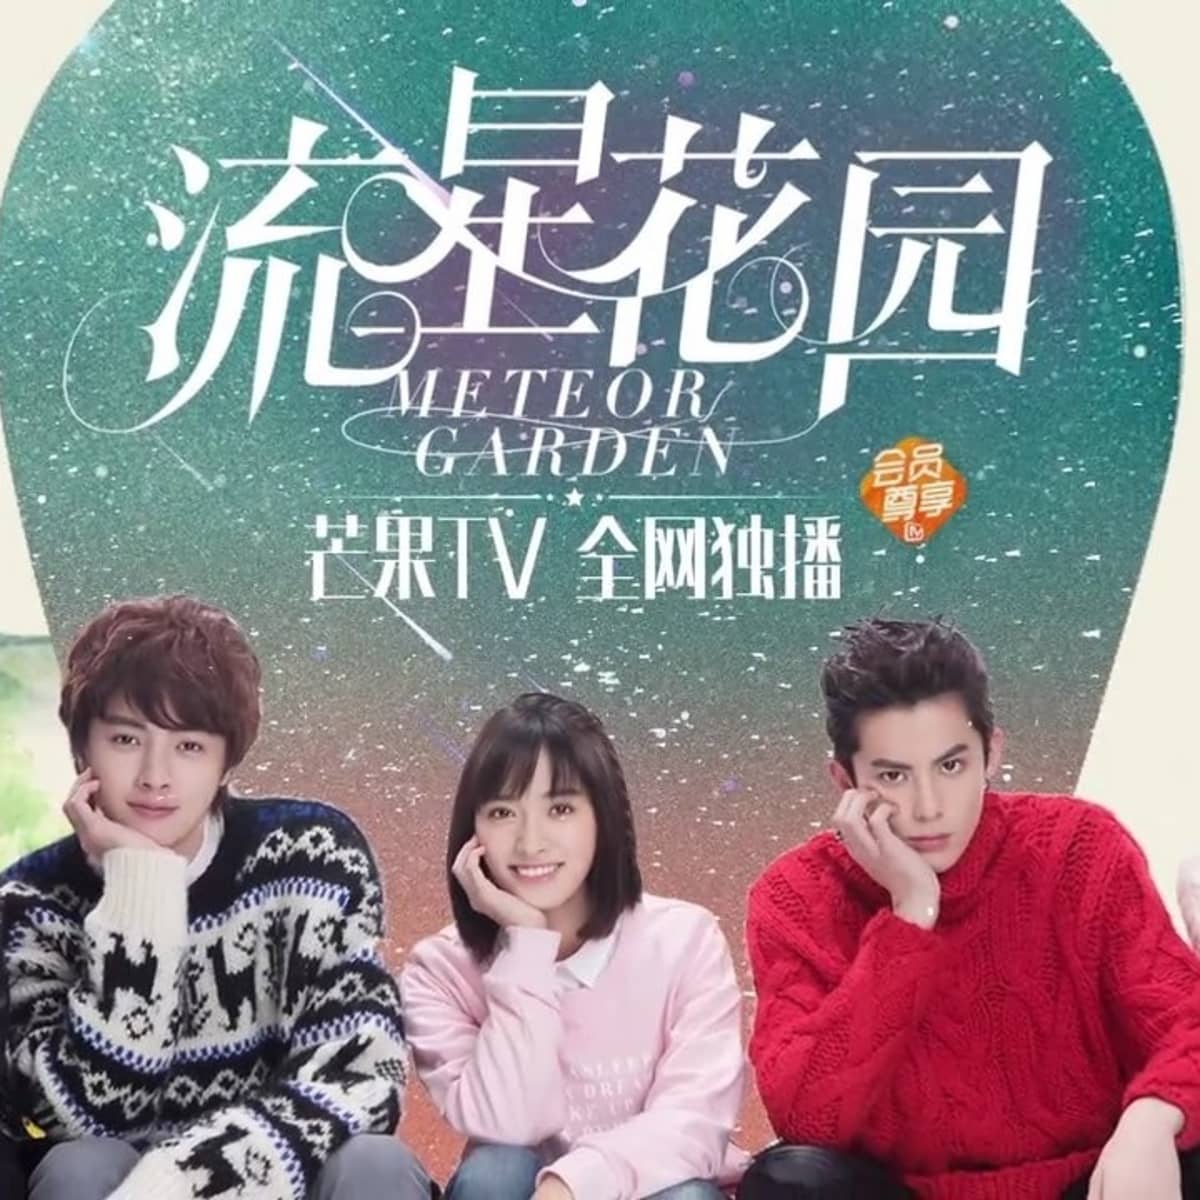 Meteor Garden 2018 Casts Fun Facts Hubpages